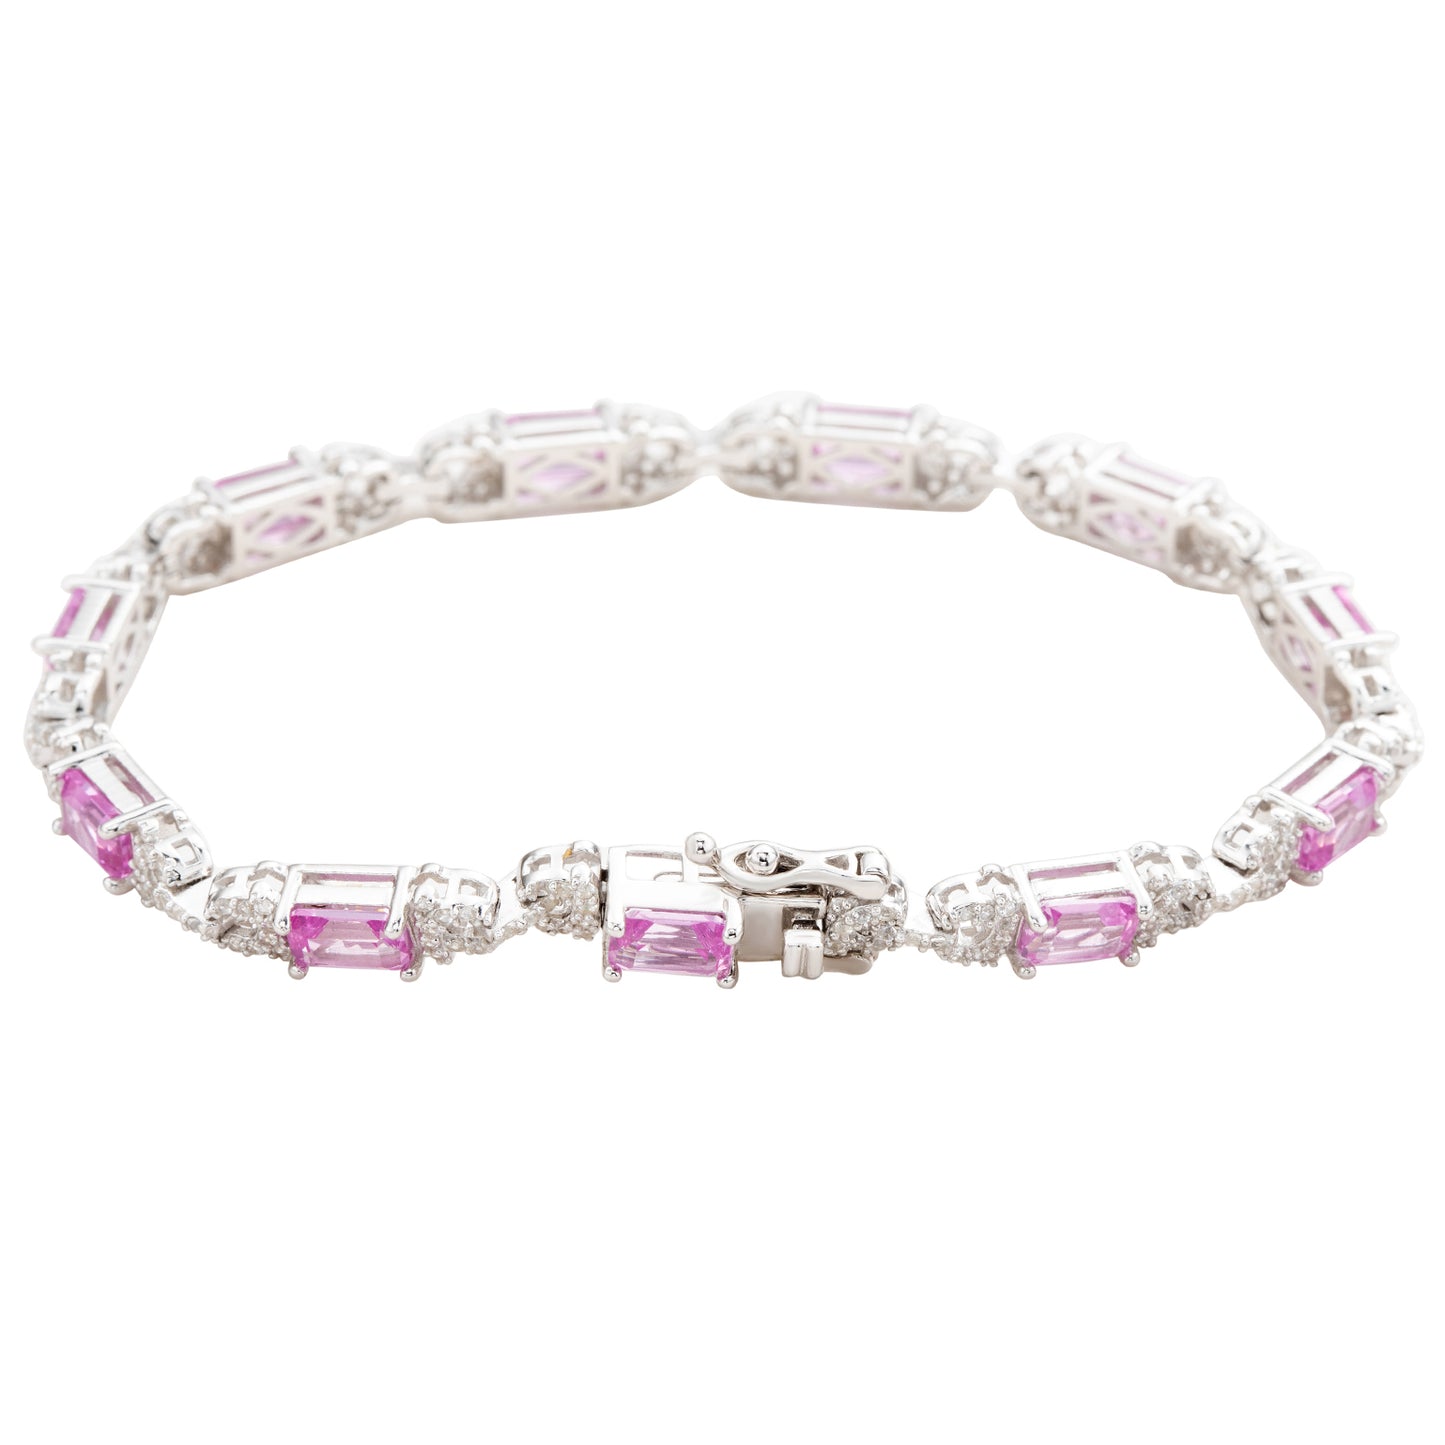 Suzy Levian Sterling Silver Emerald-Cut Pink Sapphire And Diamond Accent Tennis Bracelet